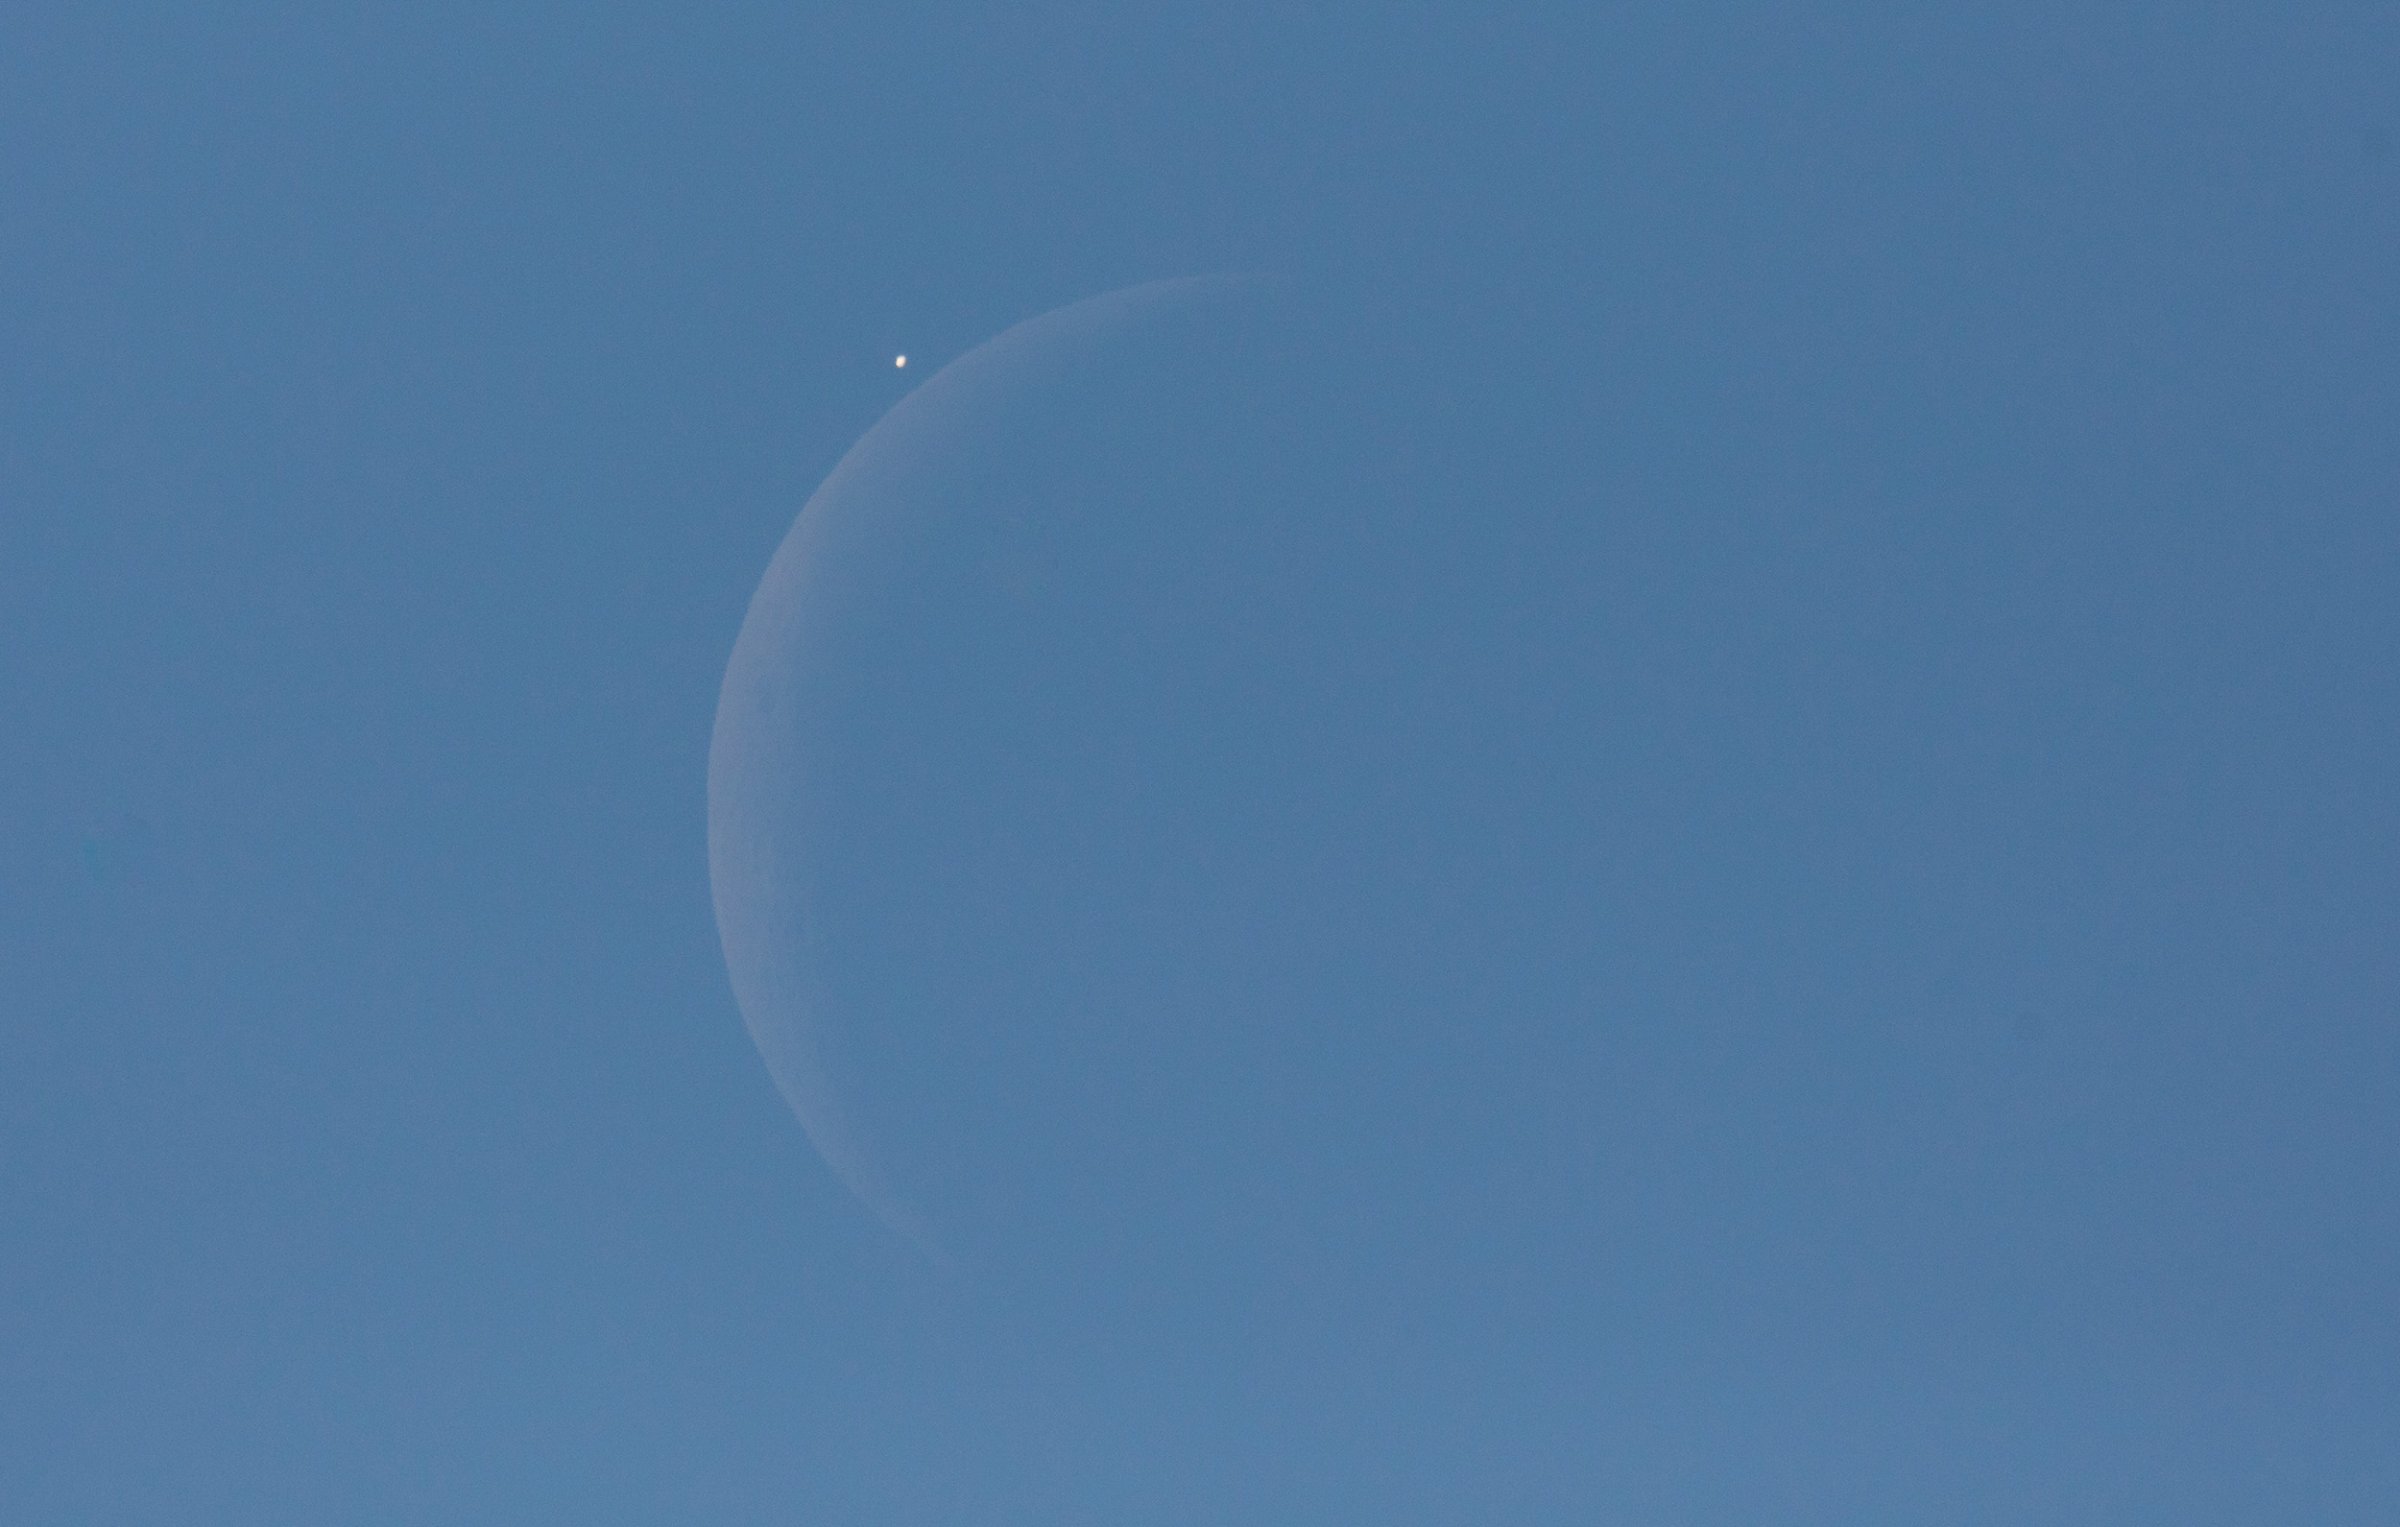 Venus is seen next to the crescent moon during the daytime, prior to the start of occultation in Washington, D.C. on Dec. 7, 2015. The moon had occulted, or passed in front of, Venus for the second time that year.